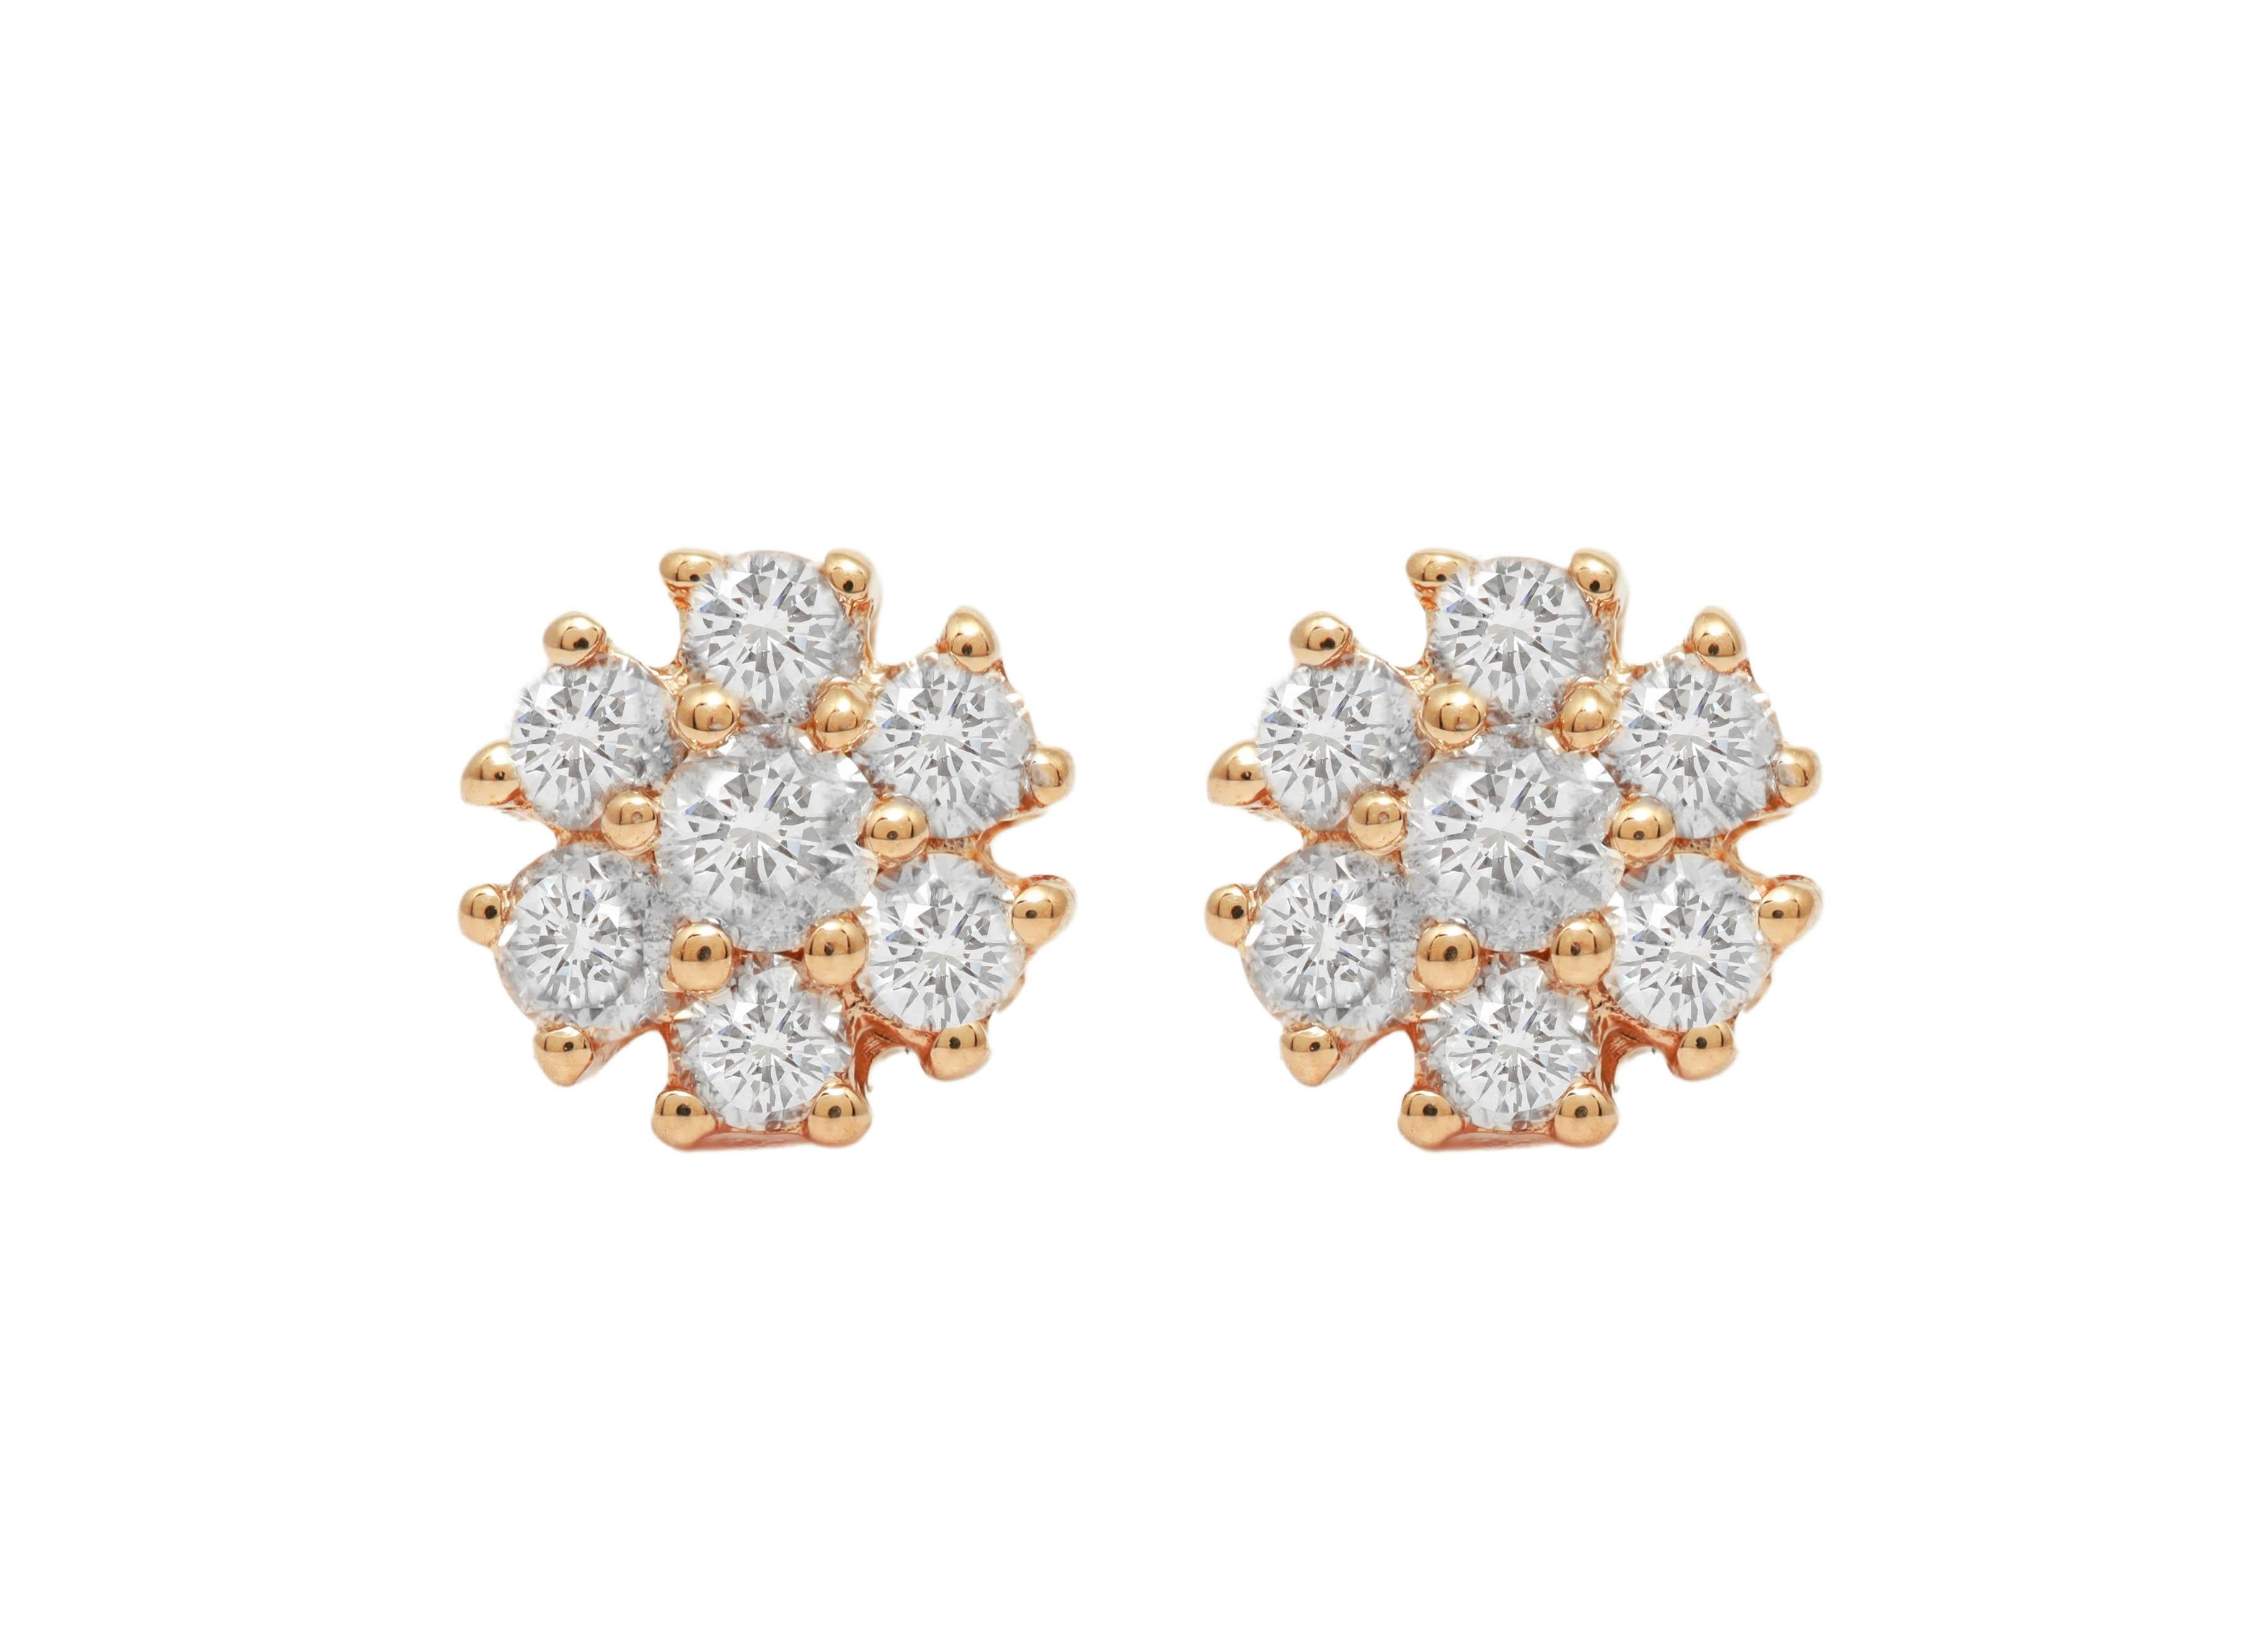 14K Rose Gold Diamond Earrings featuring 0.50 Carats of Diamonds

Underline your look with this sharp 14K Rose gold shape Diamond Earrings. High quality Diamonds. This Earrings will underline your exquisite look for any occasion.

. is a leading